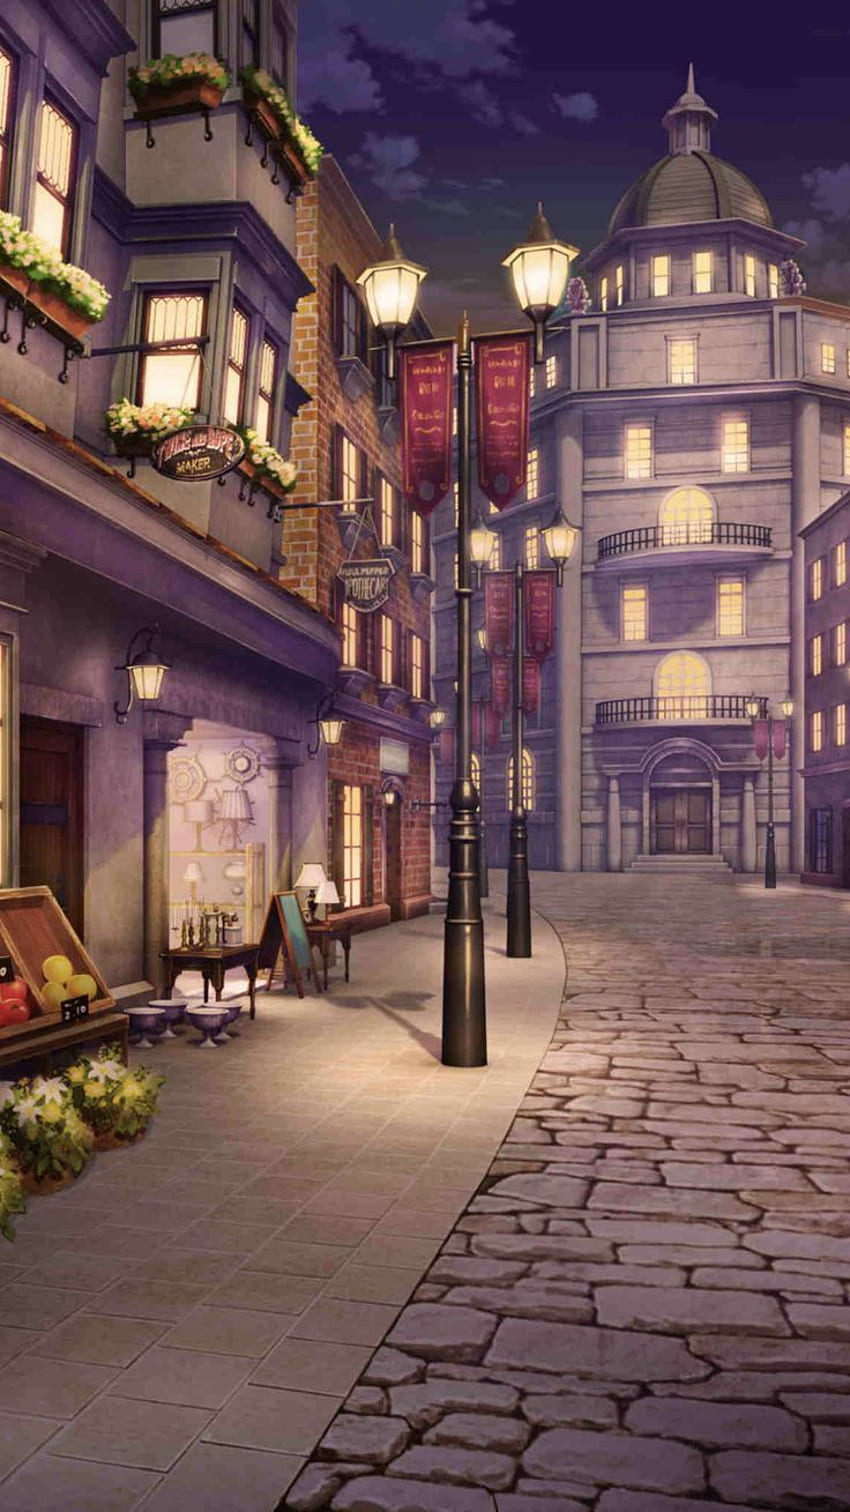 The 11 Coolest Fictional Anime Settings You'll Want to Visit - whatNerd